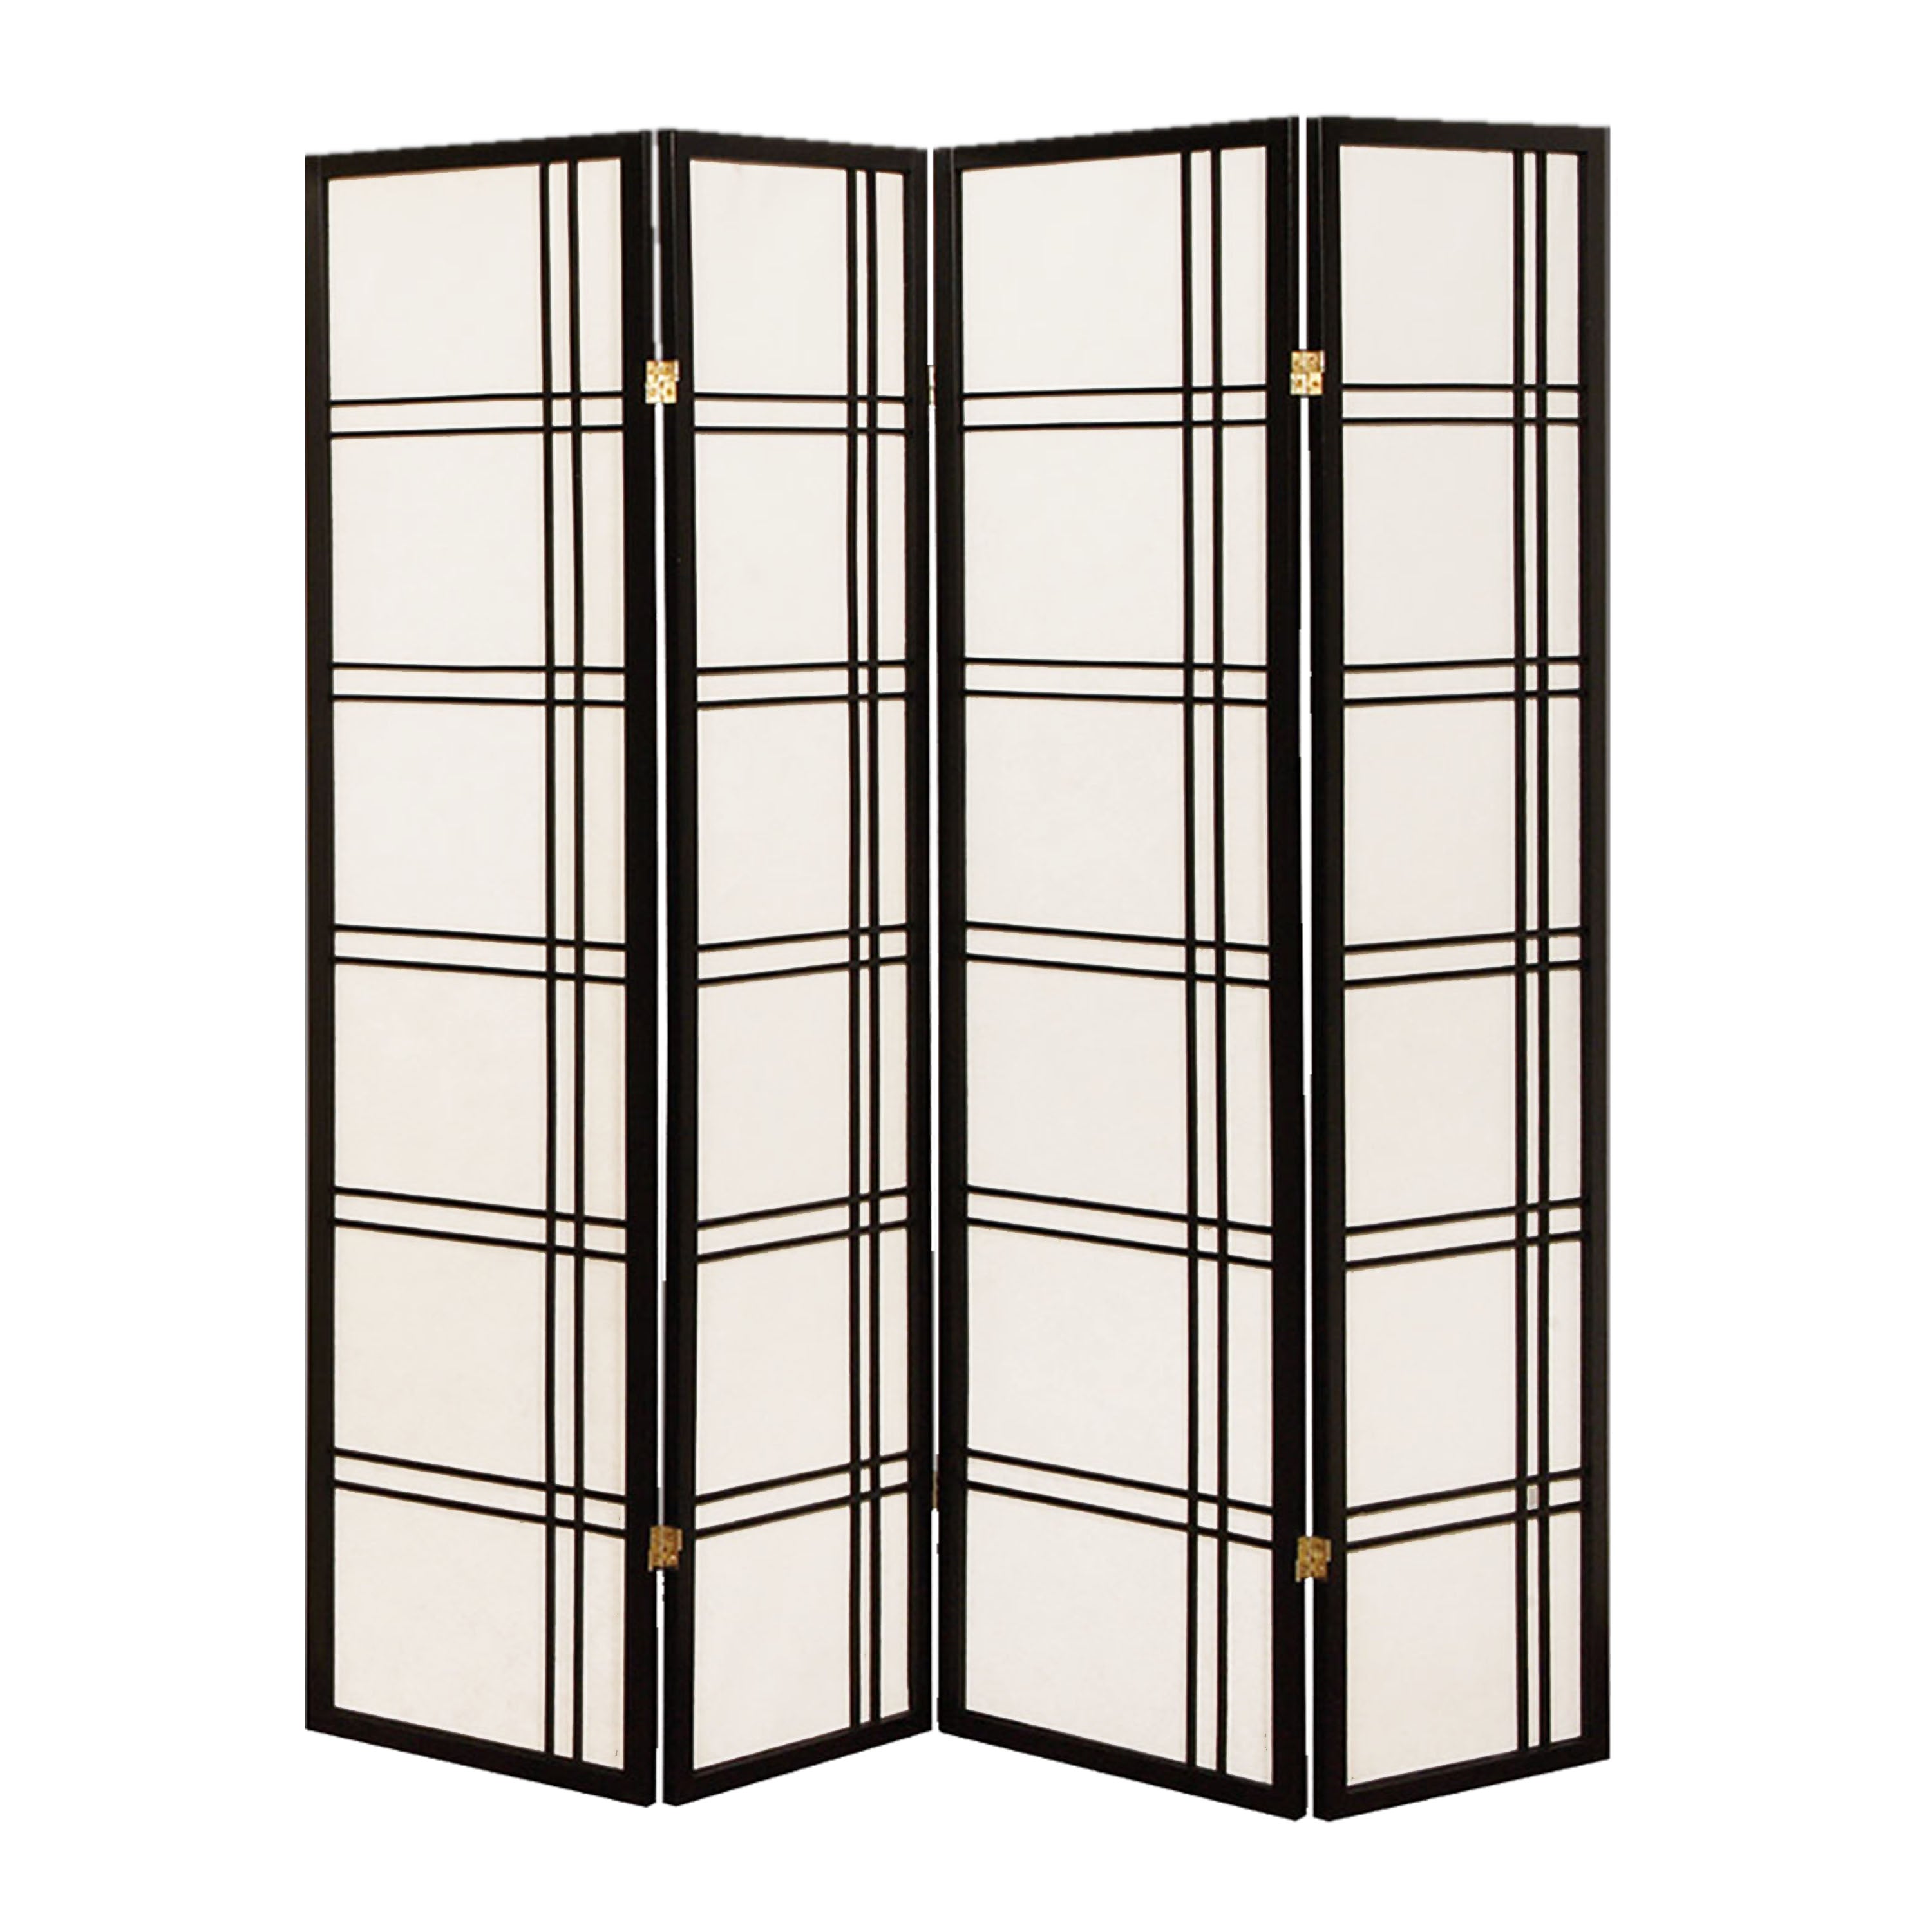 Wooden 4 Panel Room Divider with Checkered Shoji Inserts, White and Black